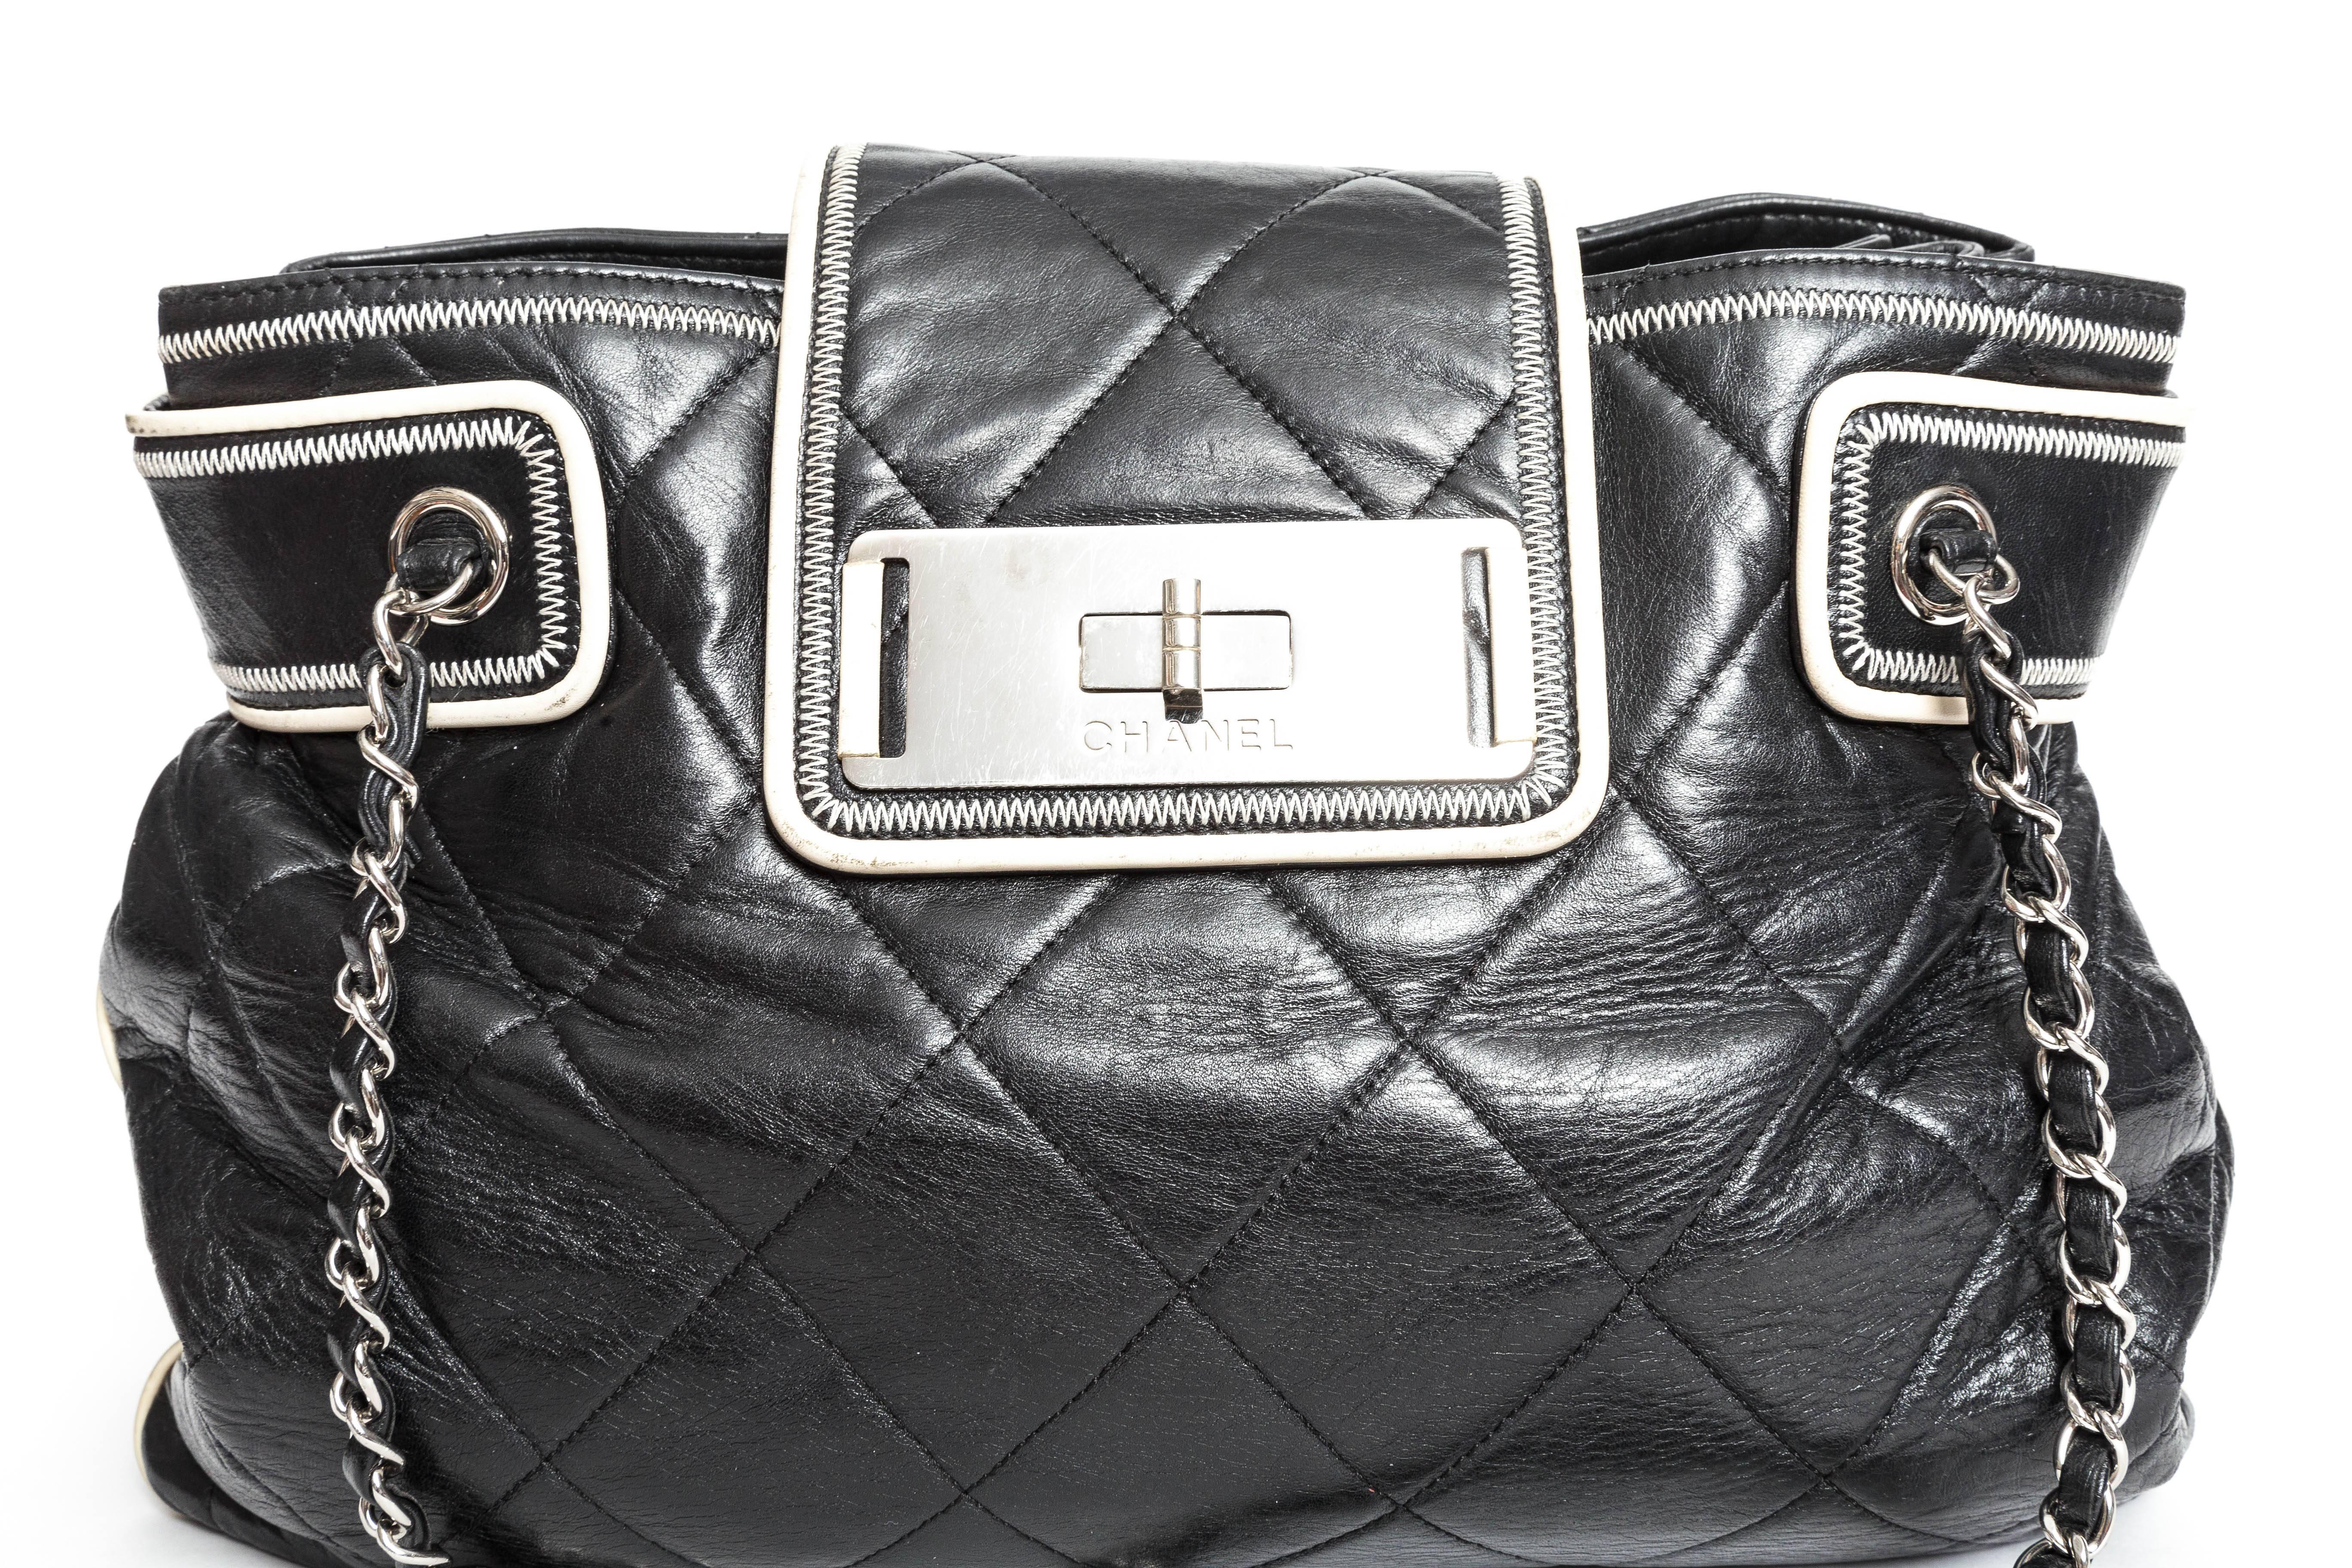 Chanel Black Leather Quilted Bag with Cream Leather Piping and Silver Hardware 1